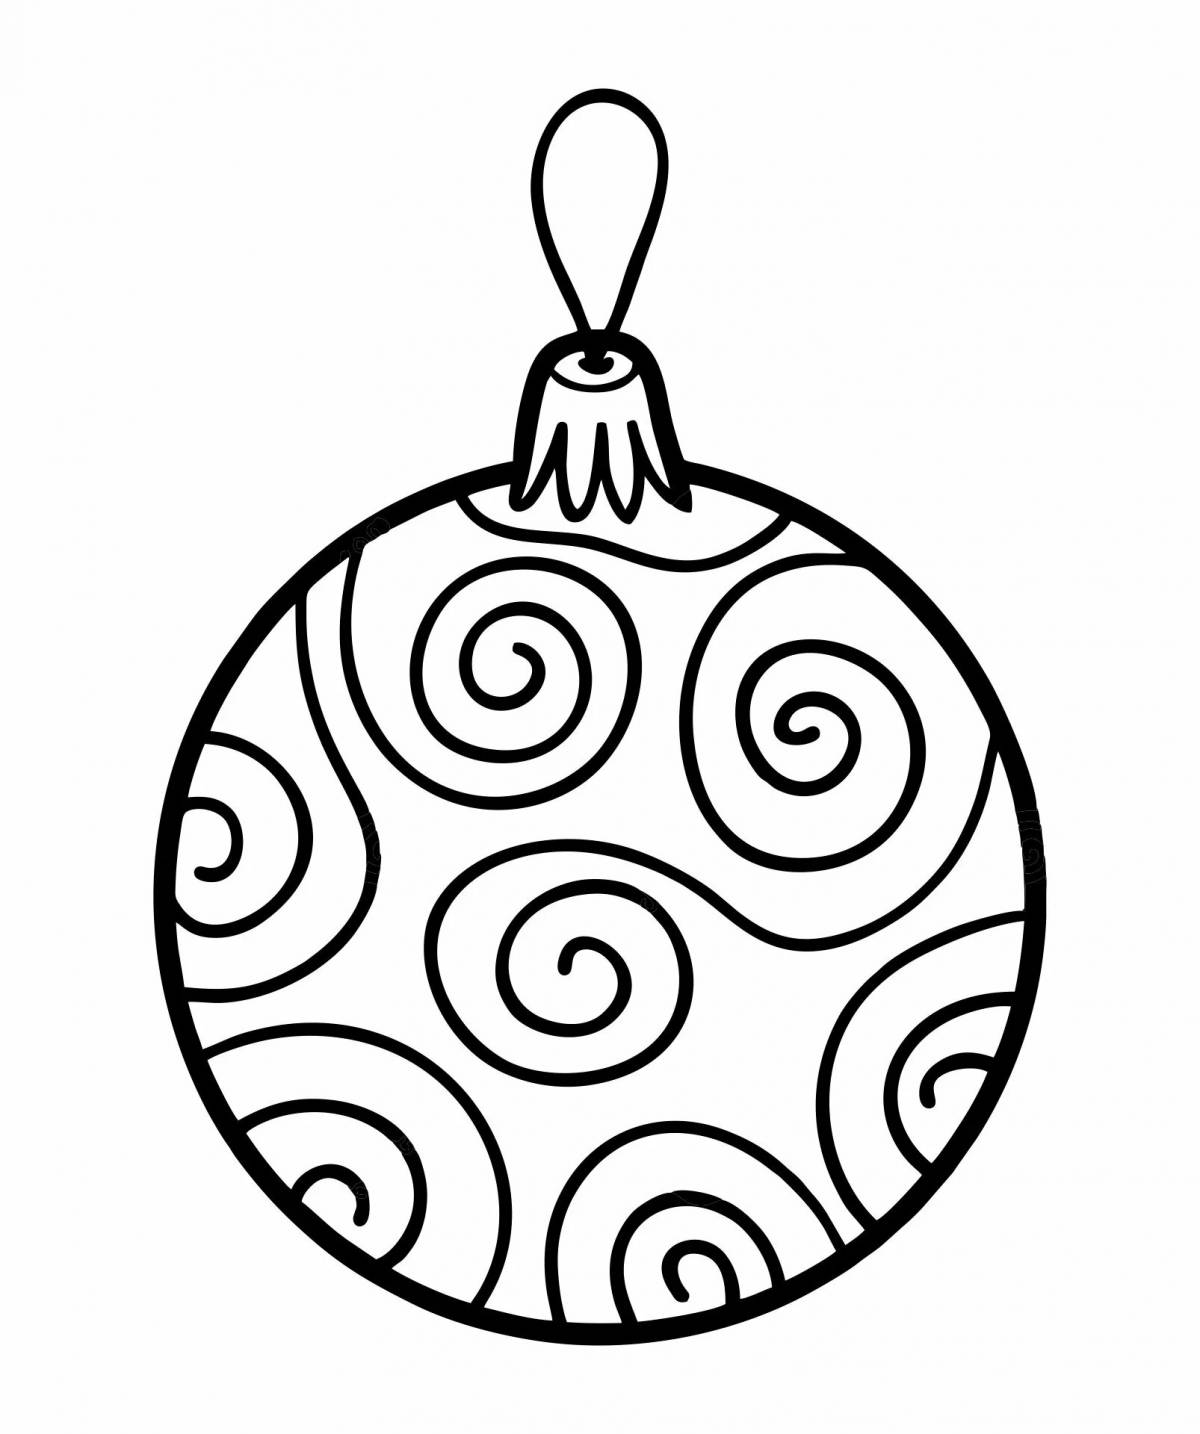 Coloring book beautiful Christmas toy ball